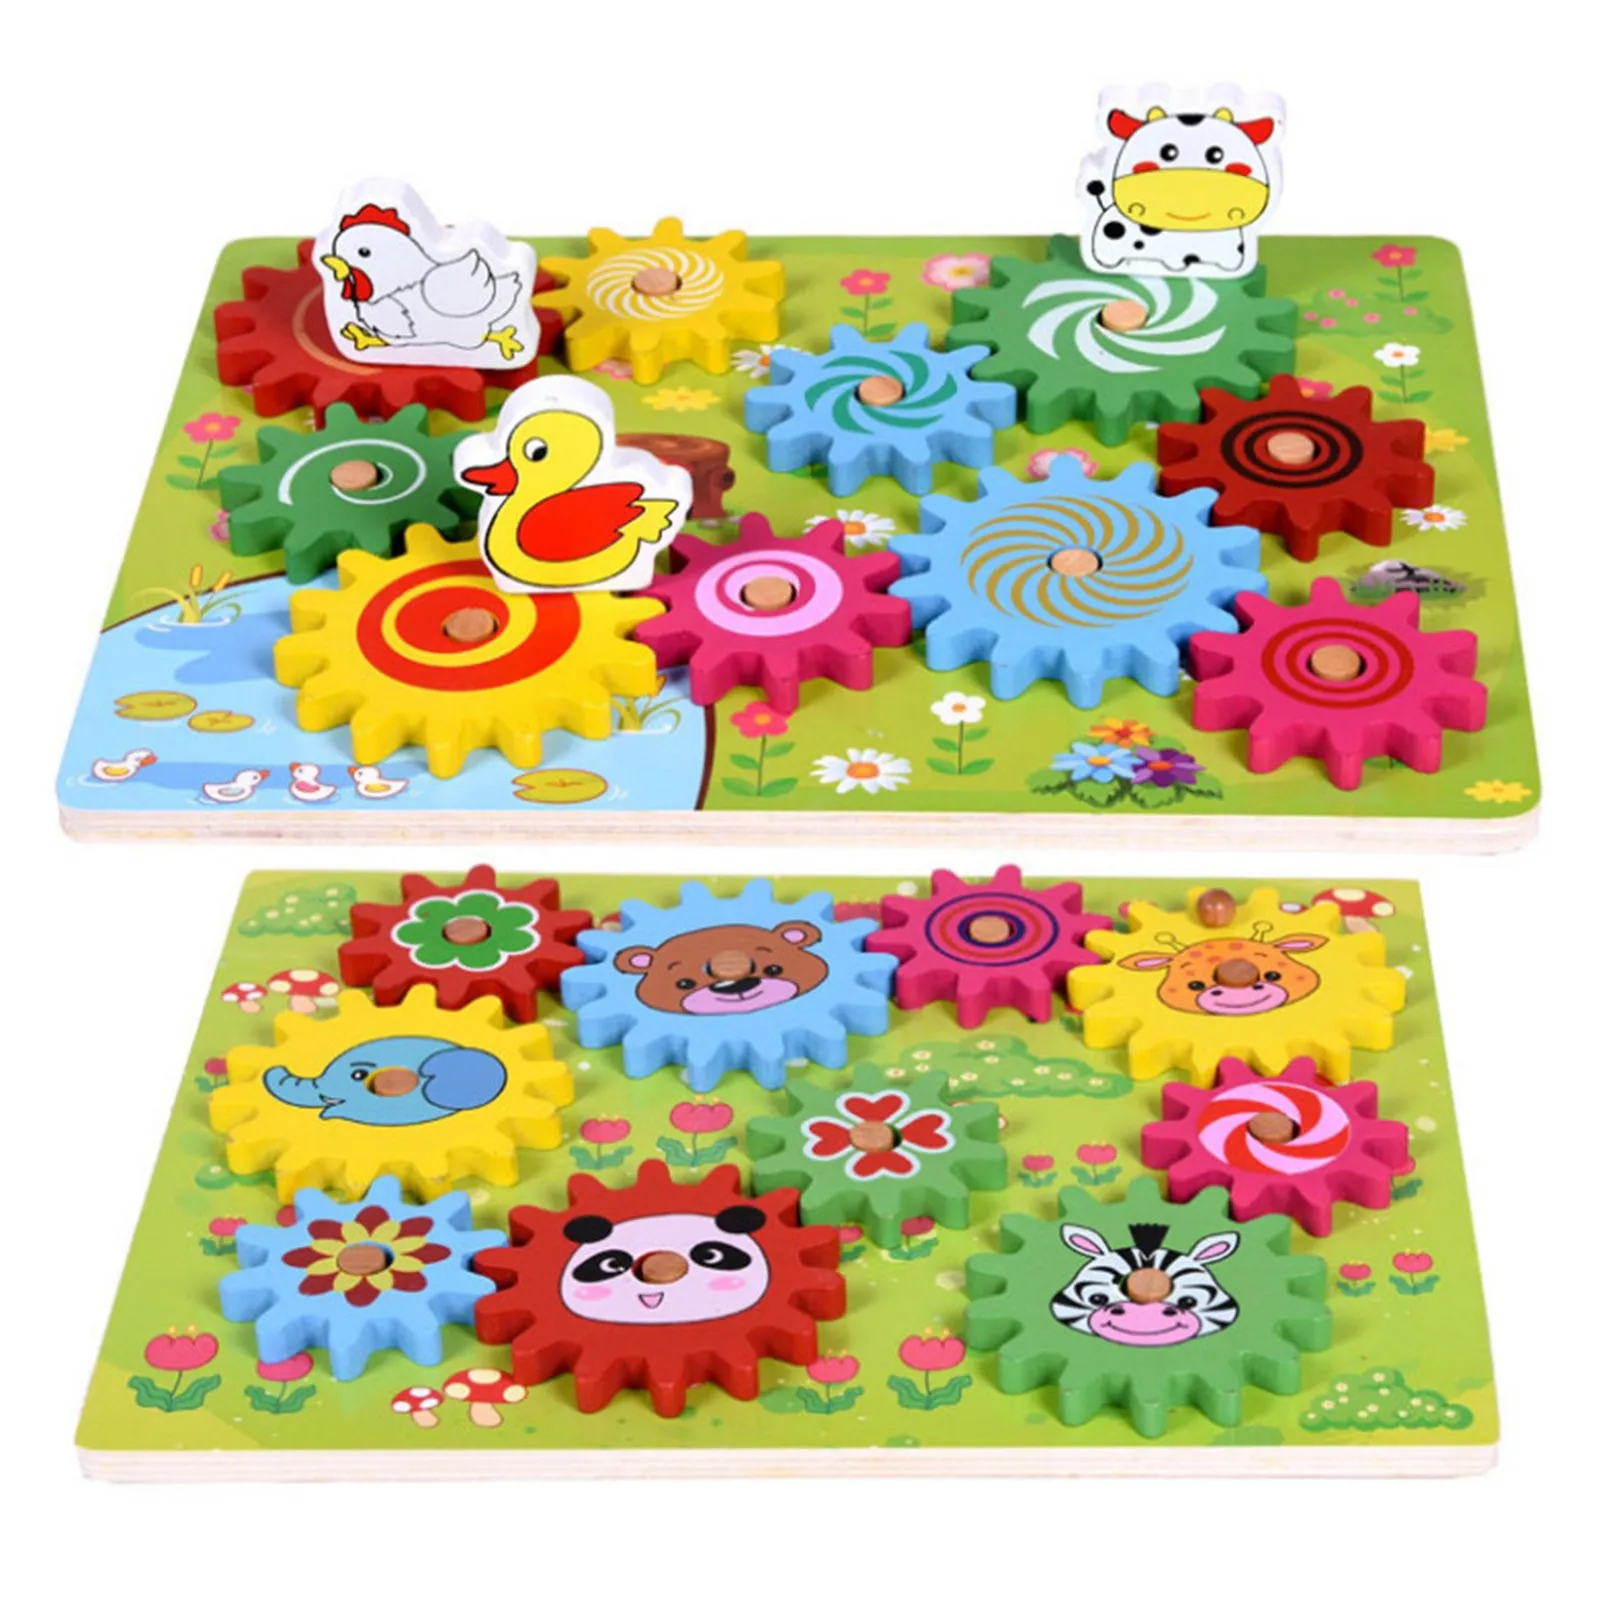 Wooden Animal 3D Gears Building Block Set Toys Kids Gift Educational Toys 